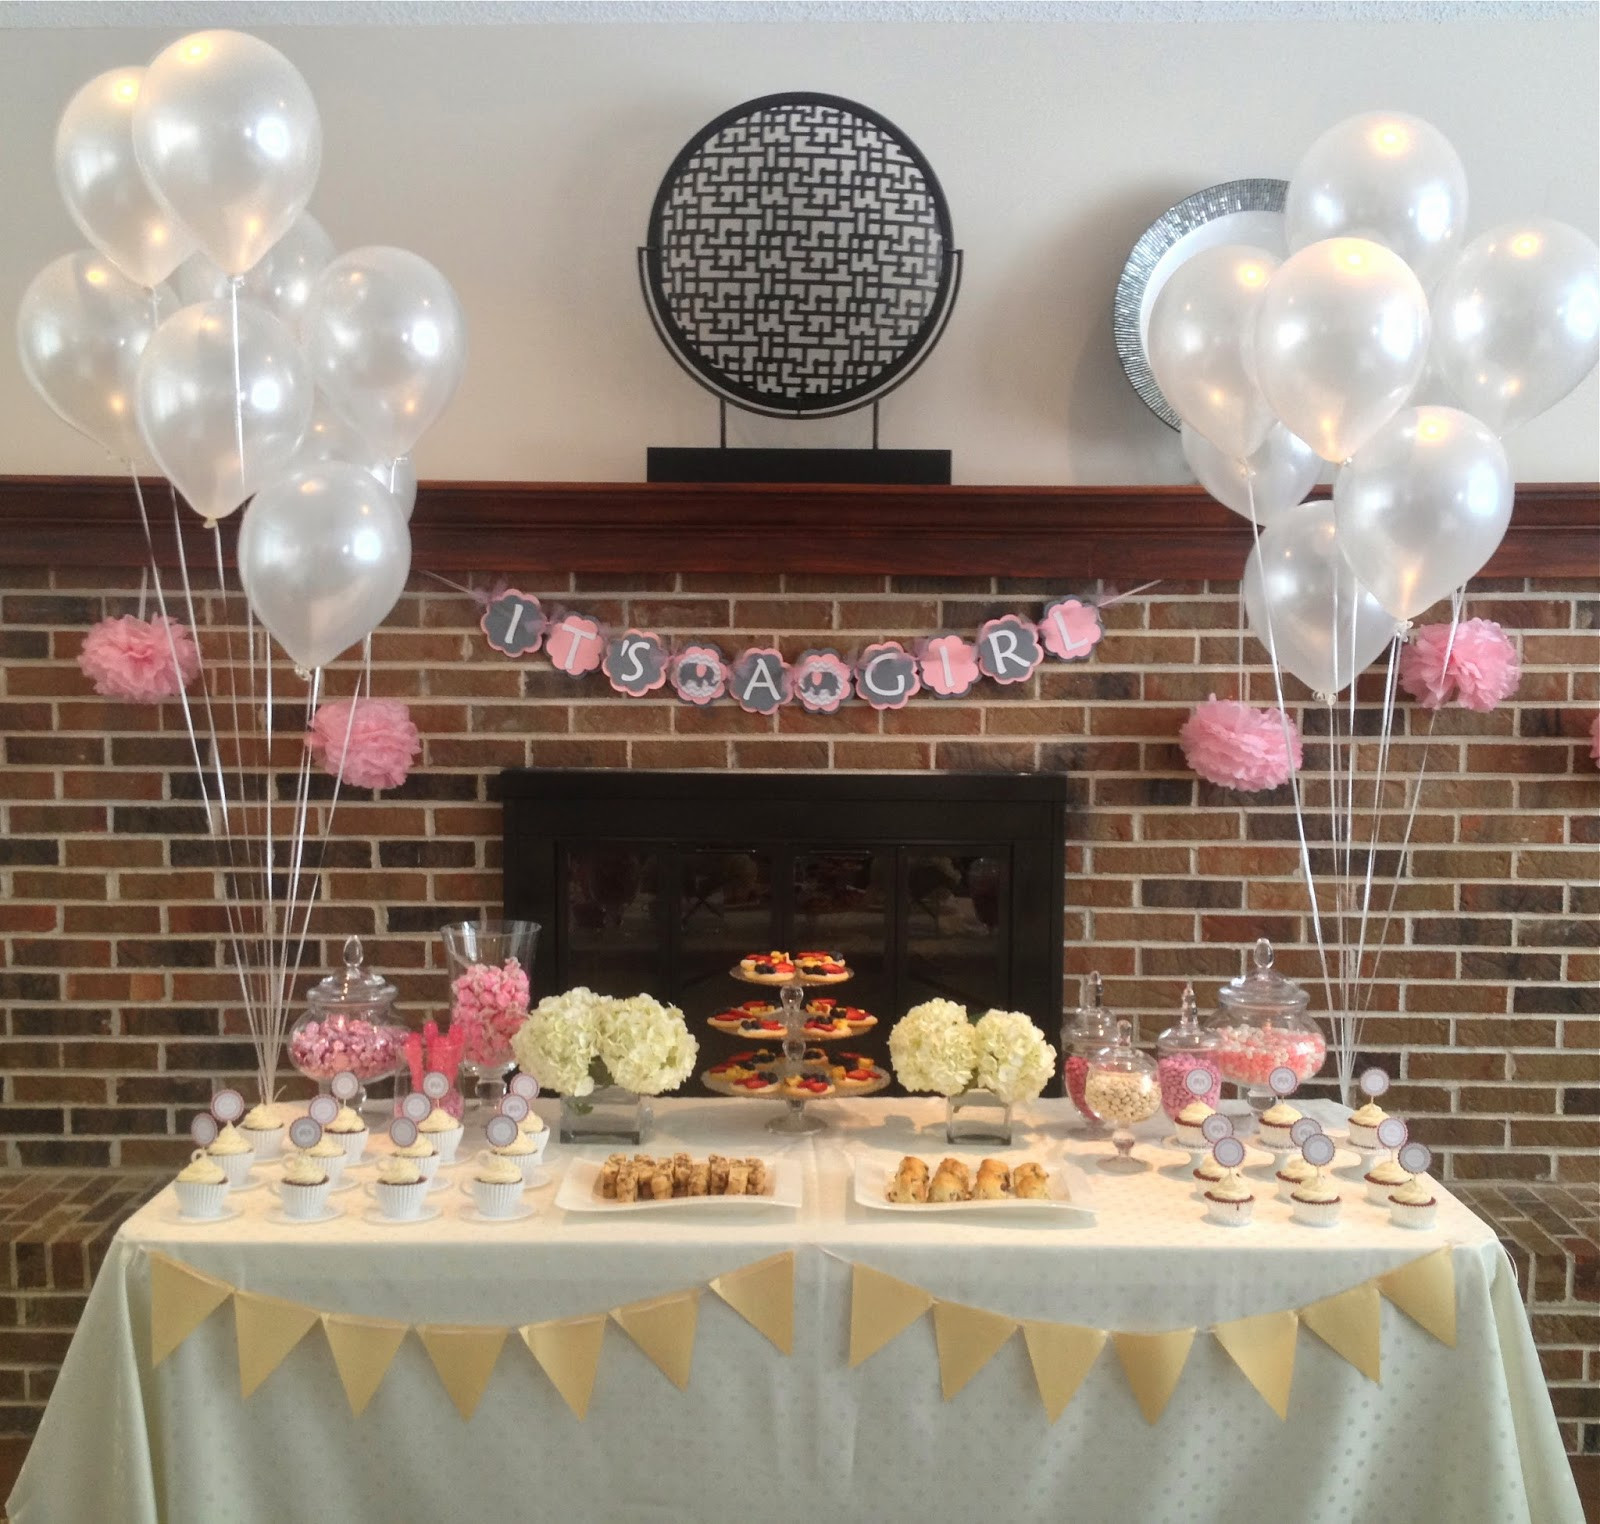 Tea Party Themed Baby Shower Ideas
 Eat with Grace Pink and Grey Tea Party Themed Baby Shower